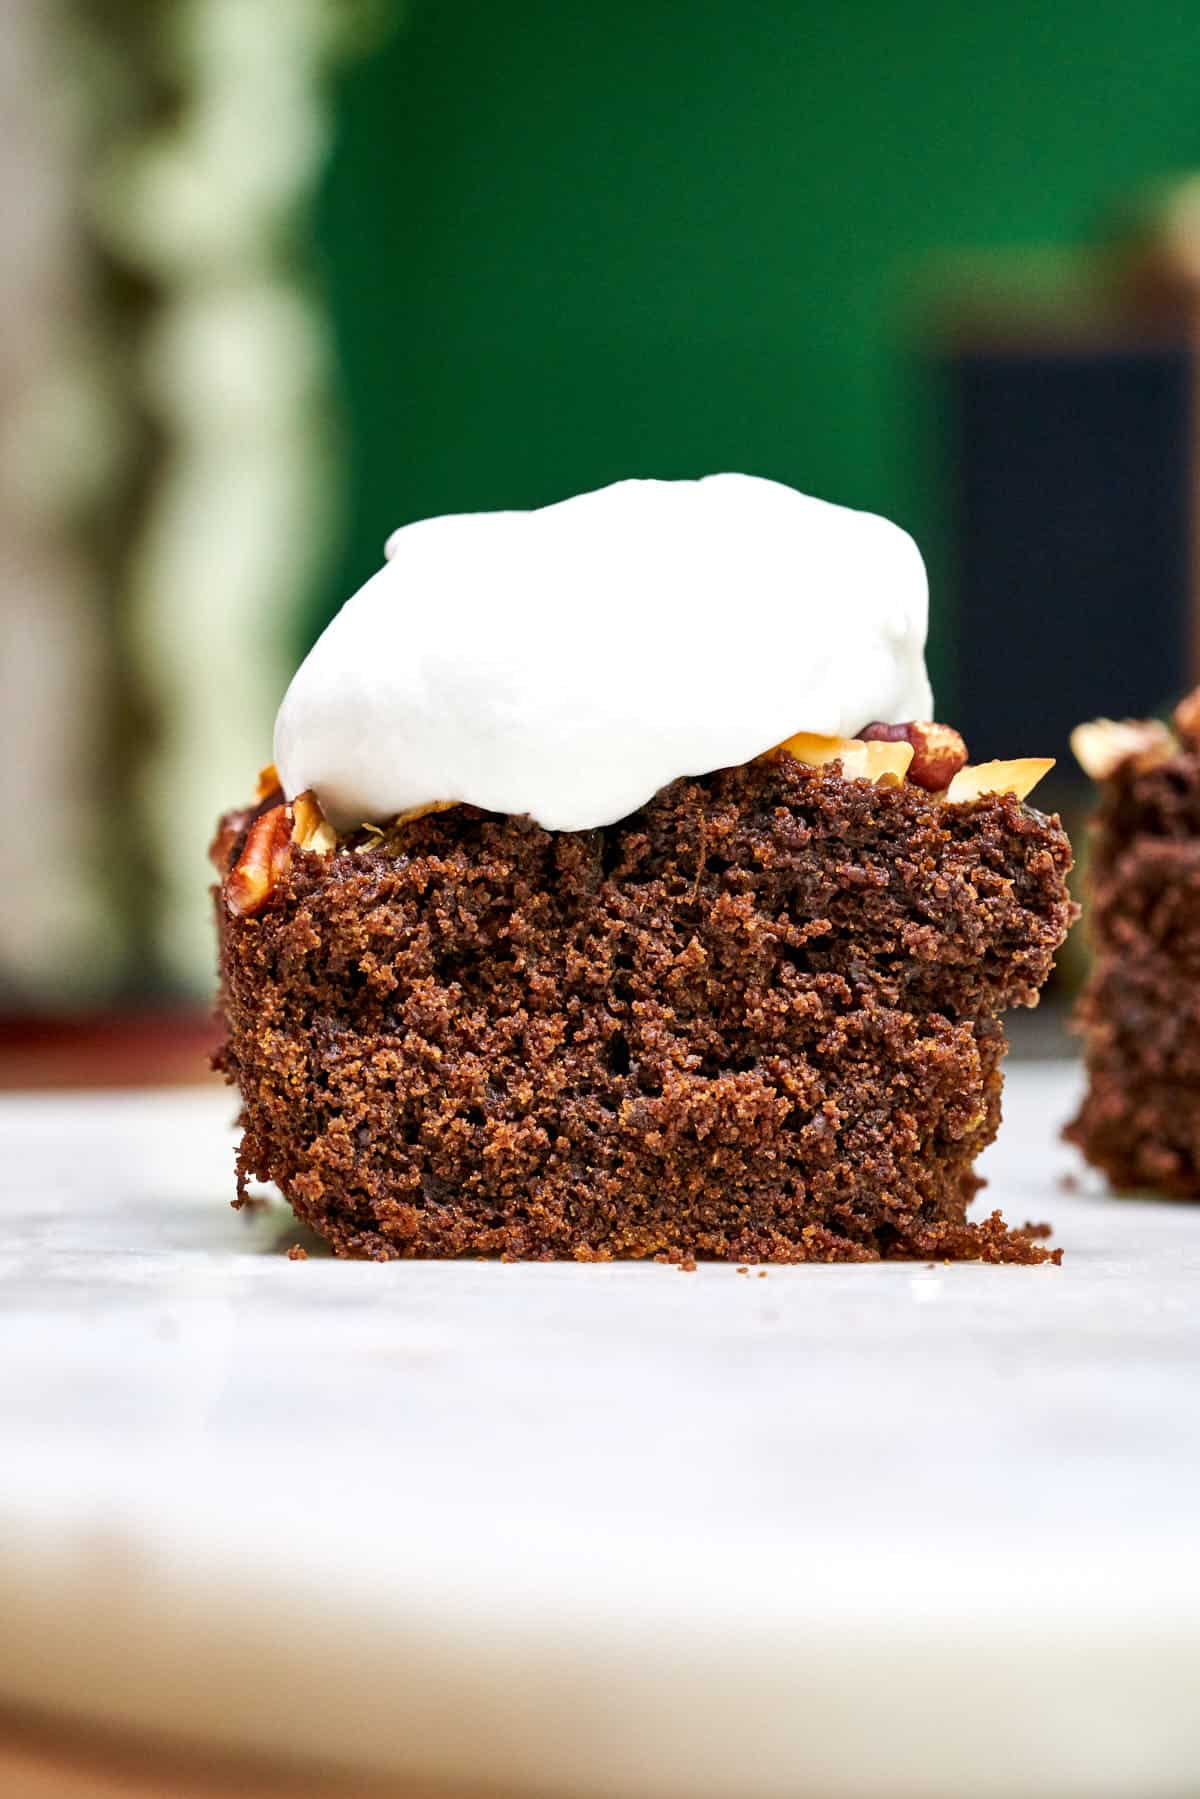 A slice of chocolate ginger cake with nuts and whipped cream on top.